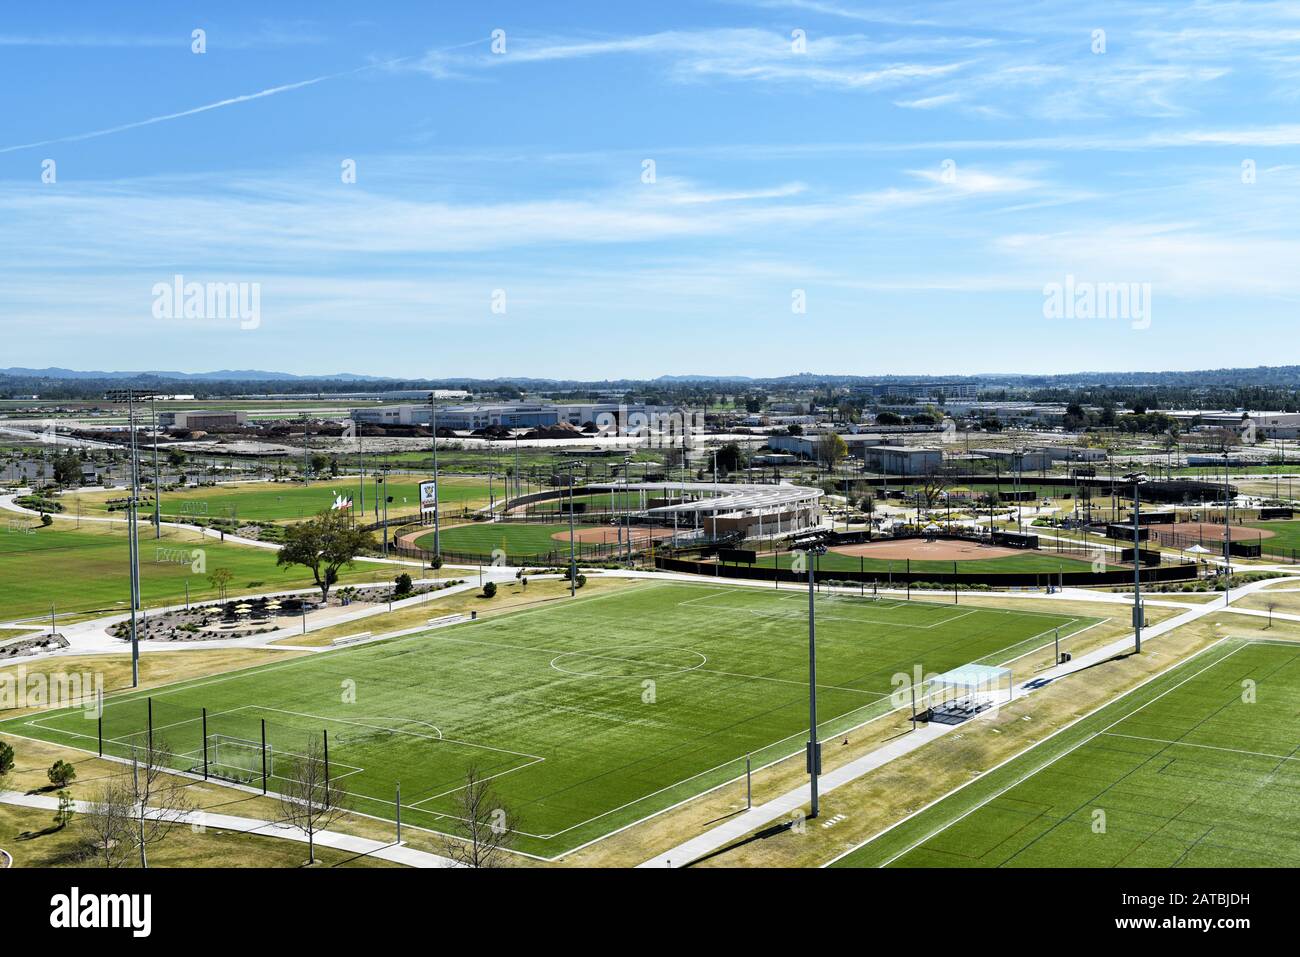 IRVINE, CALIFORNIA - 31 JAN 2020: Aerial view of soccer fields and the Softball Stadium at the Orange County Great Park. Stock Photo